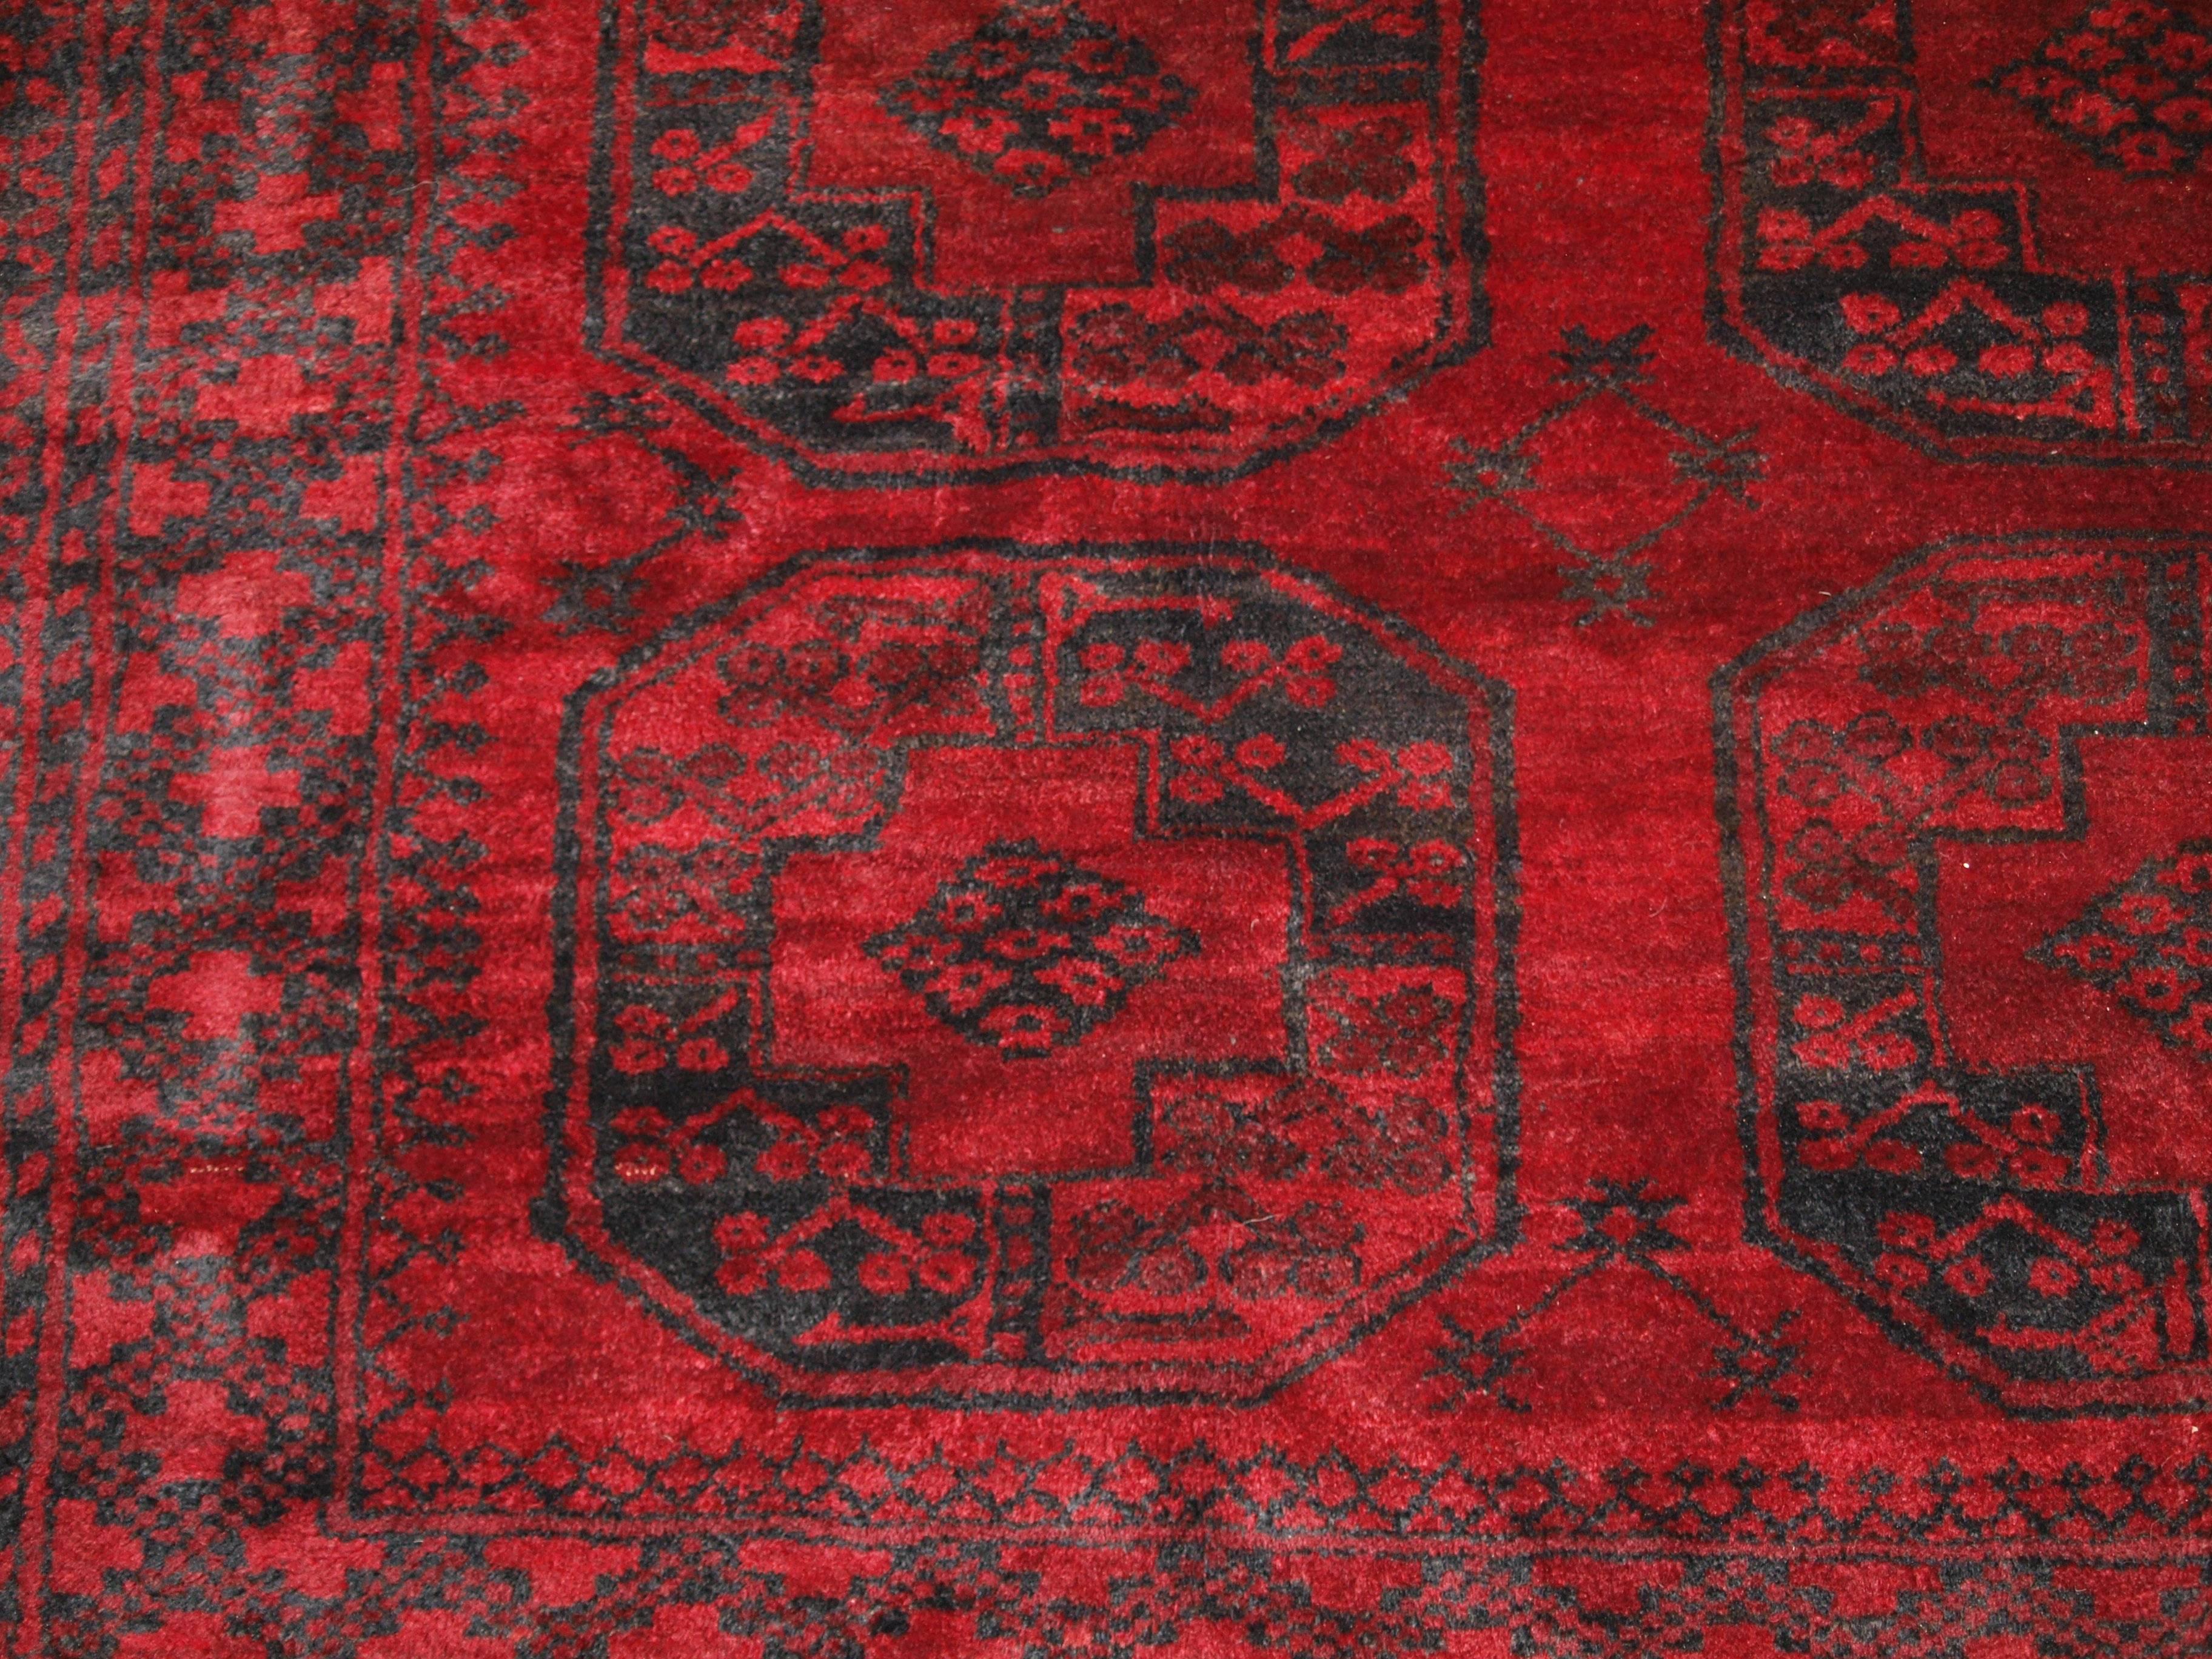 Old Traditional Afghan Village carpet, very deep rich red color, superb condition, circa 1920.
Size: 11ft 2in x 7ft 9in (340 x 236cm).

Old red Afghan carpet with Traditional design, this carpet has superb color with a very good deep rich red and